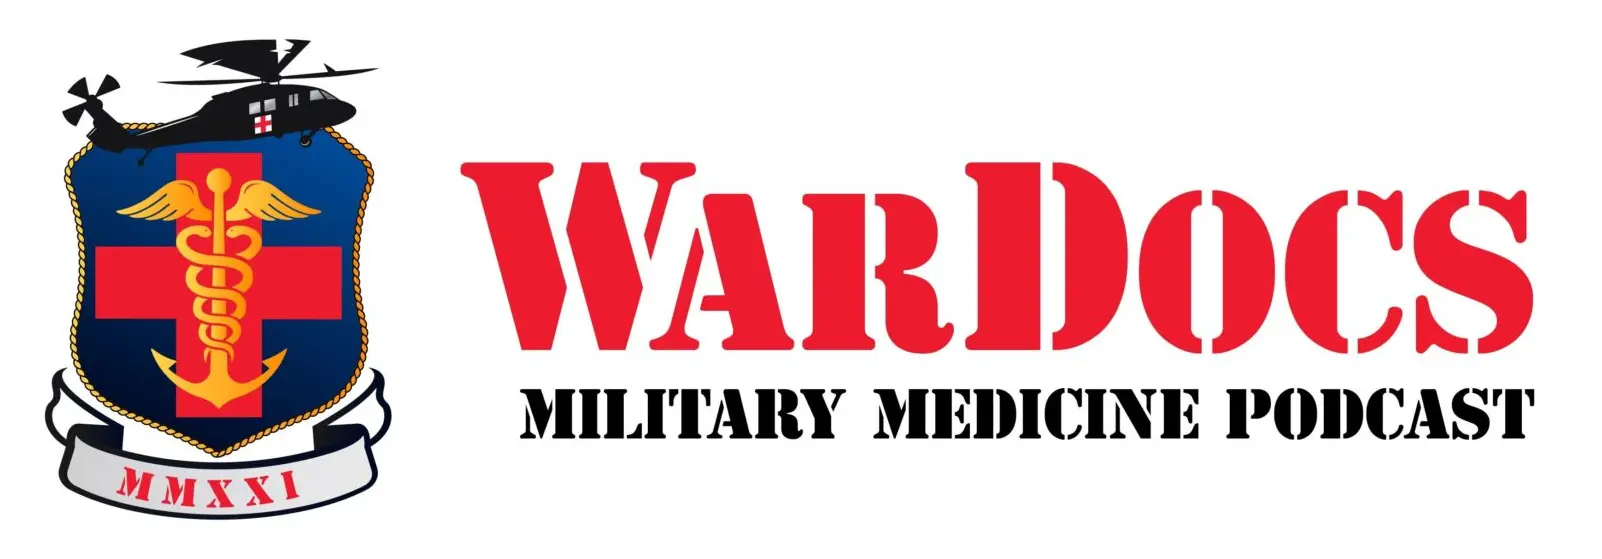 Logo of 'wardocs military medicine podcast' featuring a crest with medical symbols and the year mmxxi.